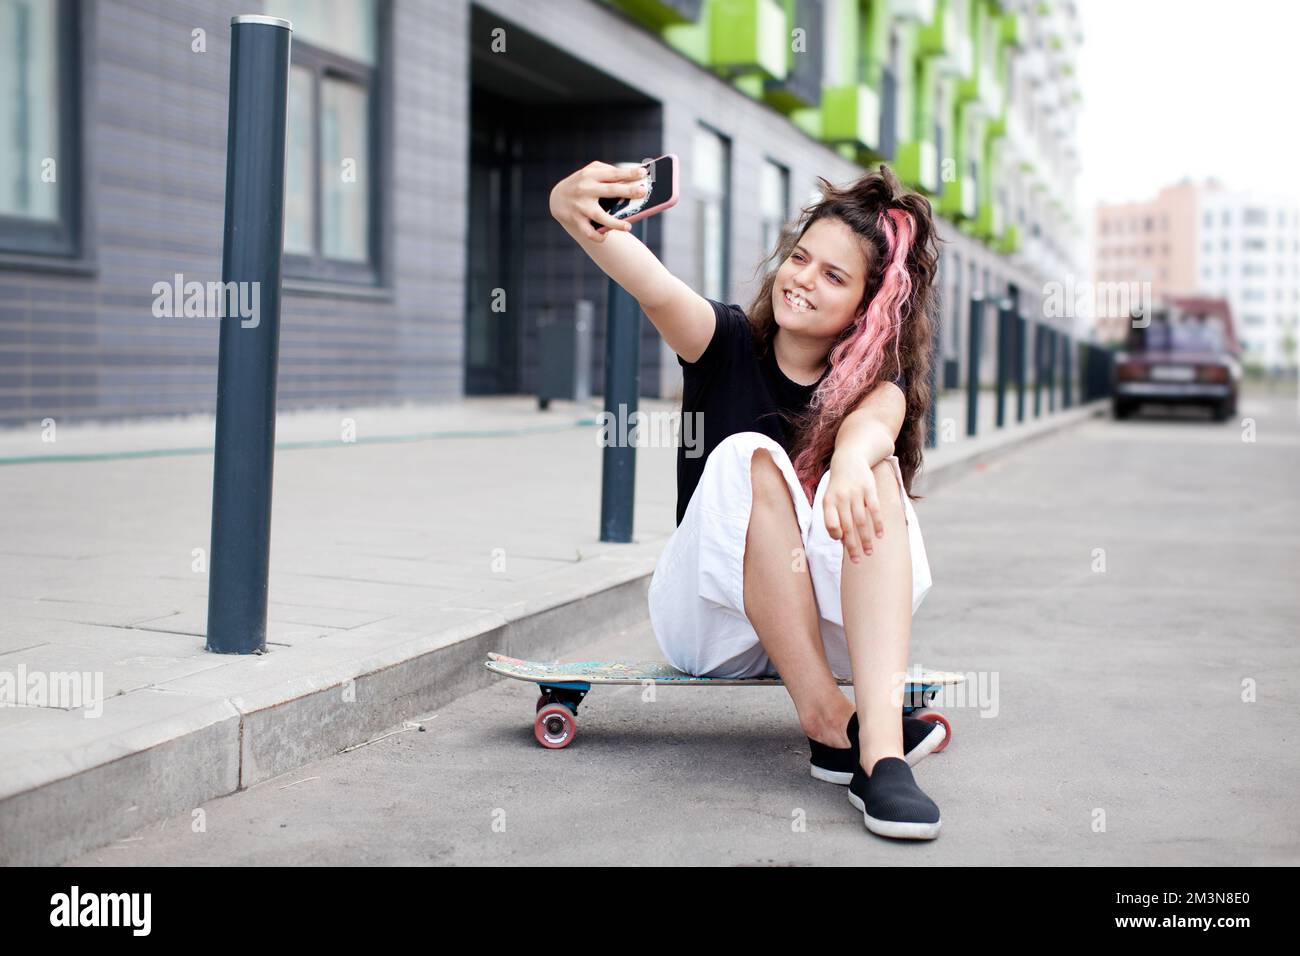 Teen girl sitting on road on skateboard, taking selfie on her phone and smiling. Lifestyle youth culture. Trendy teen with long pink colored hair Stock Photo